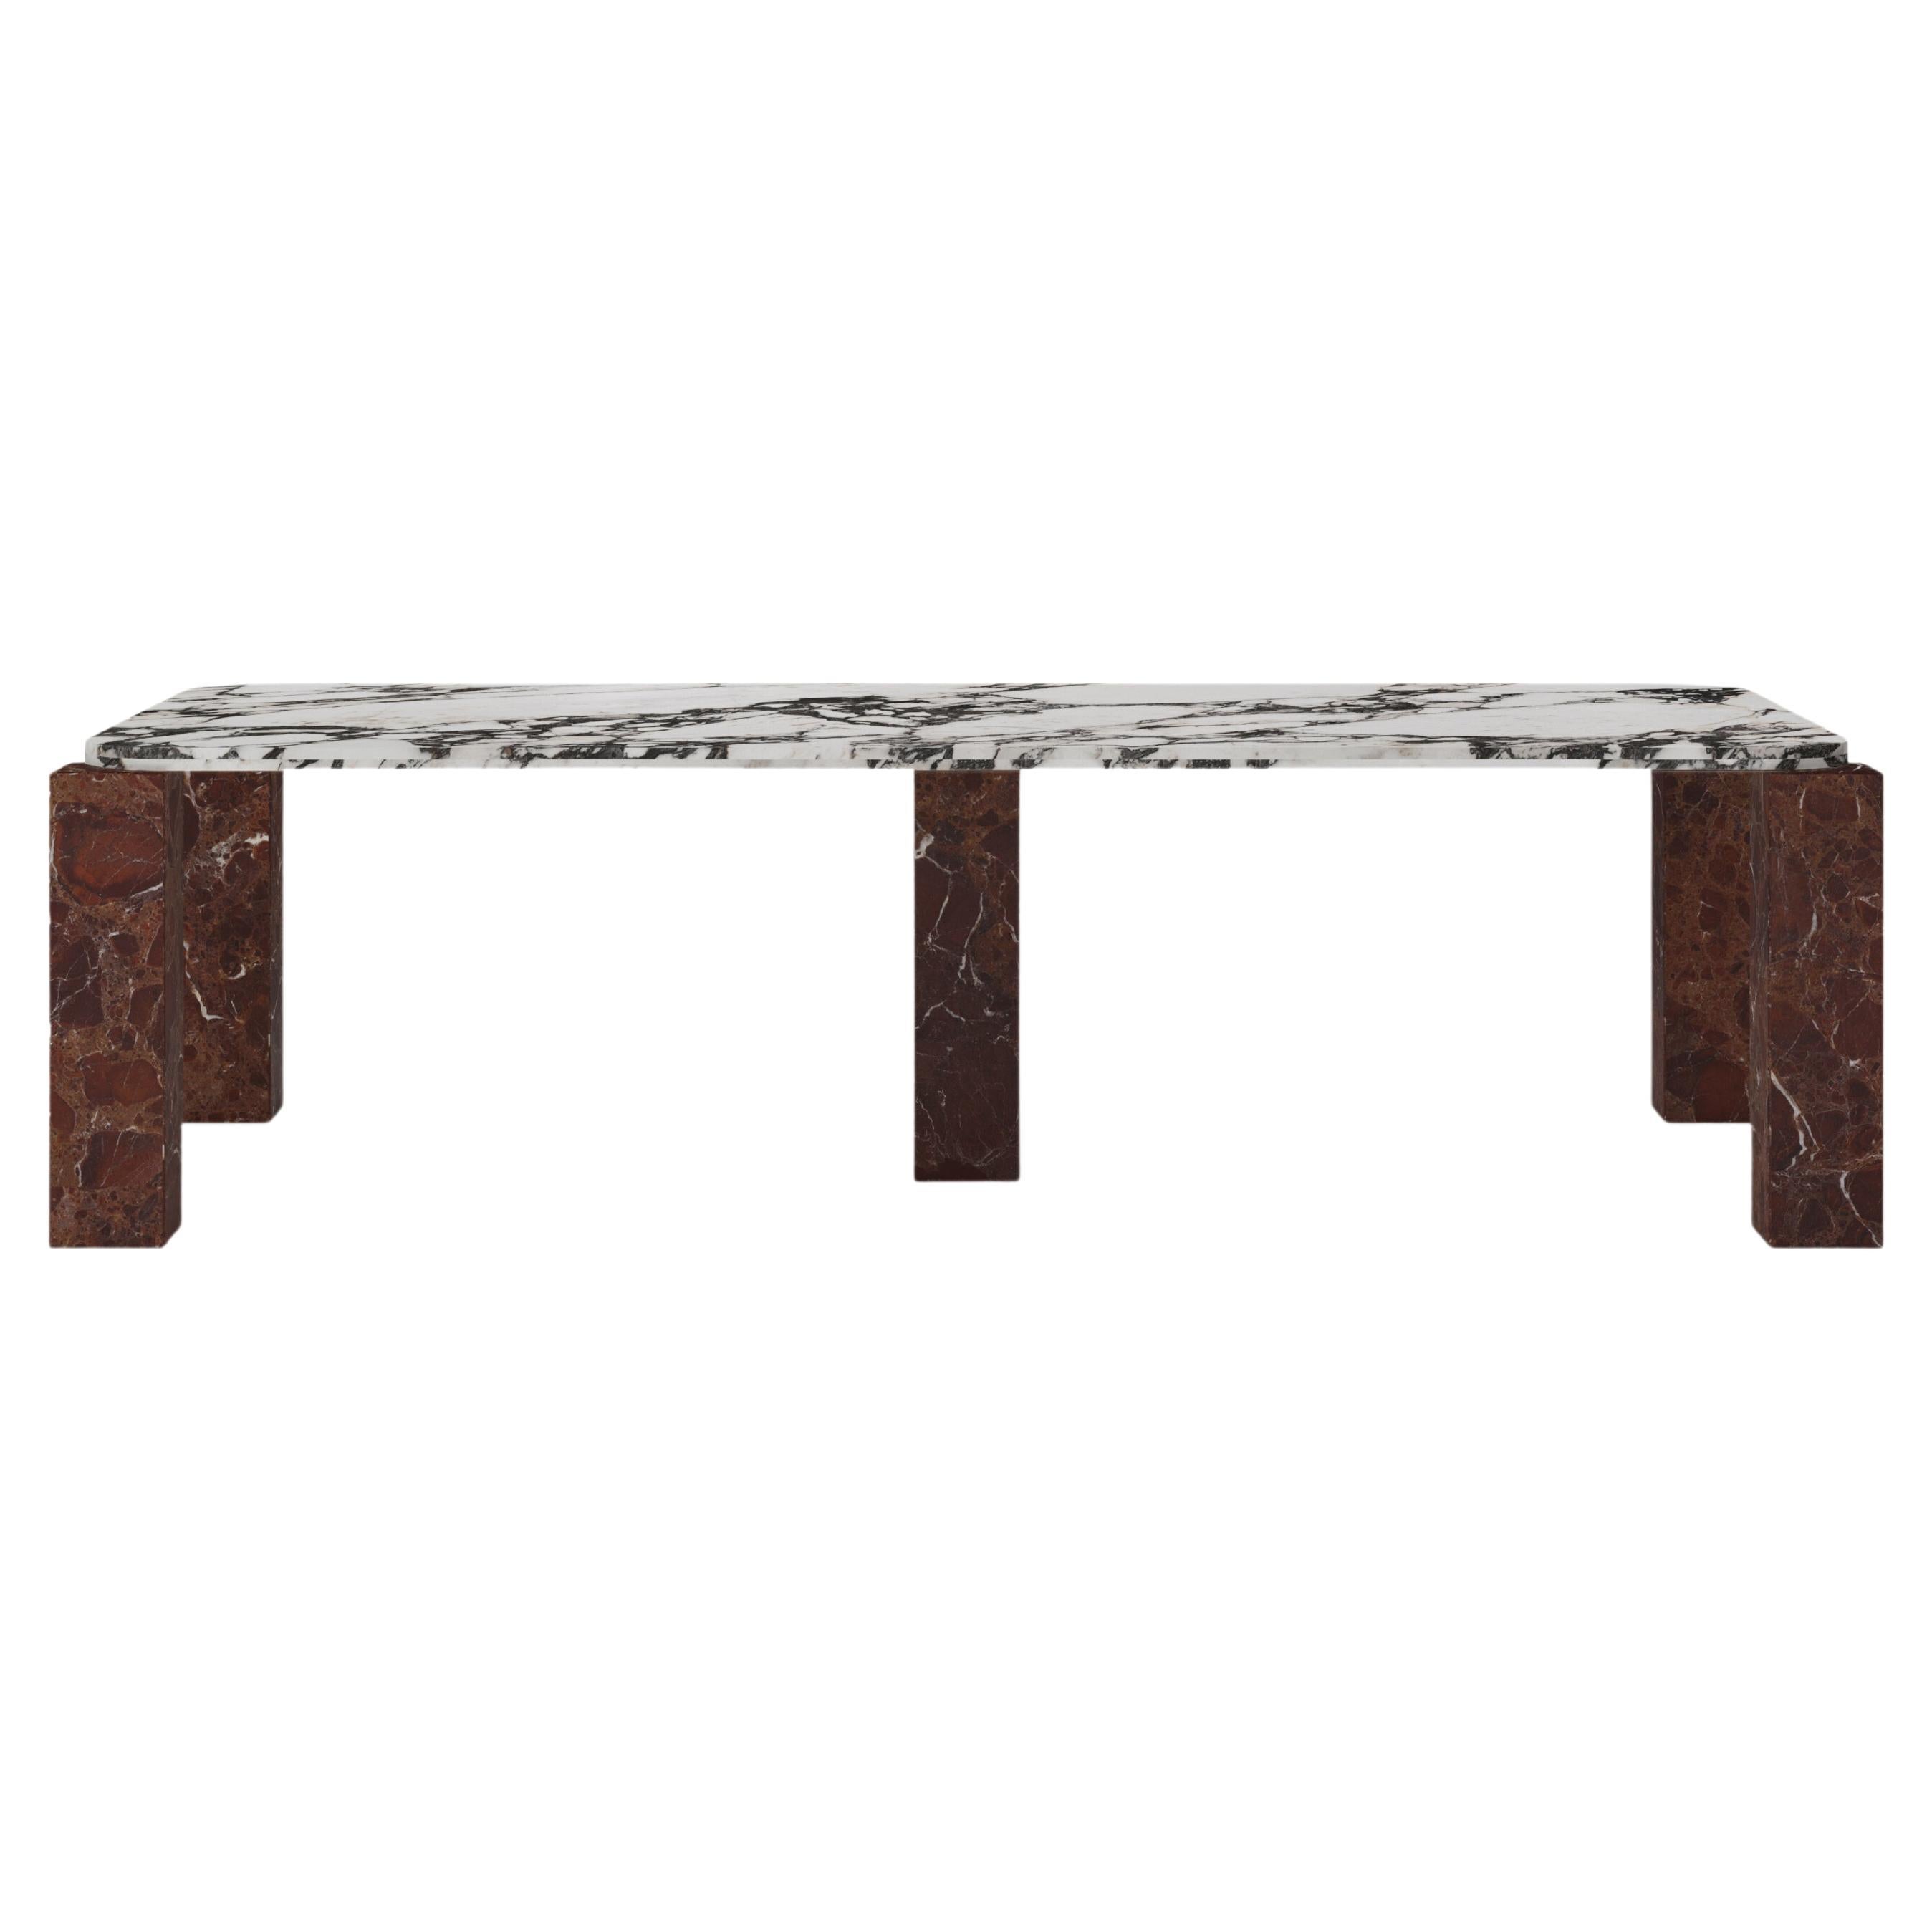 FORM(LA) Cubo Rectangle Dining Table 98”L x 44”W x 30”H Viola & Rosso Marble For Sale